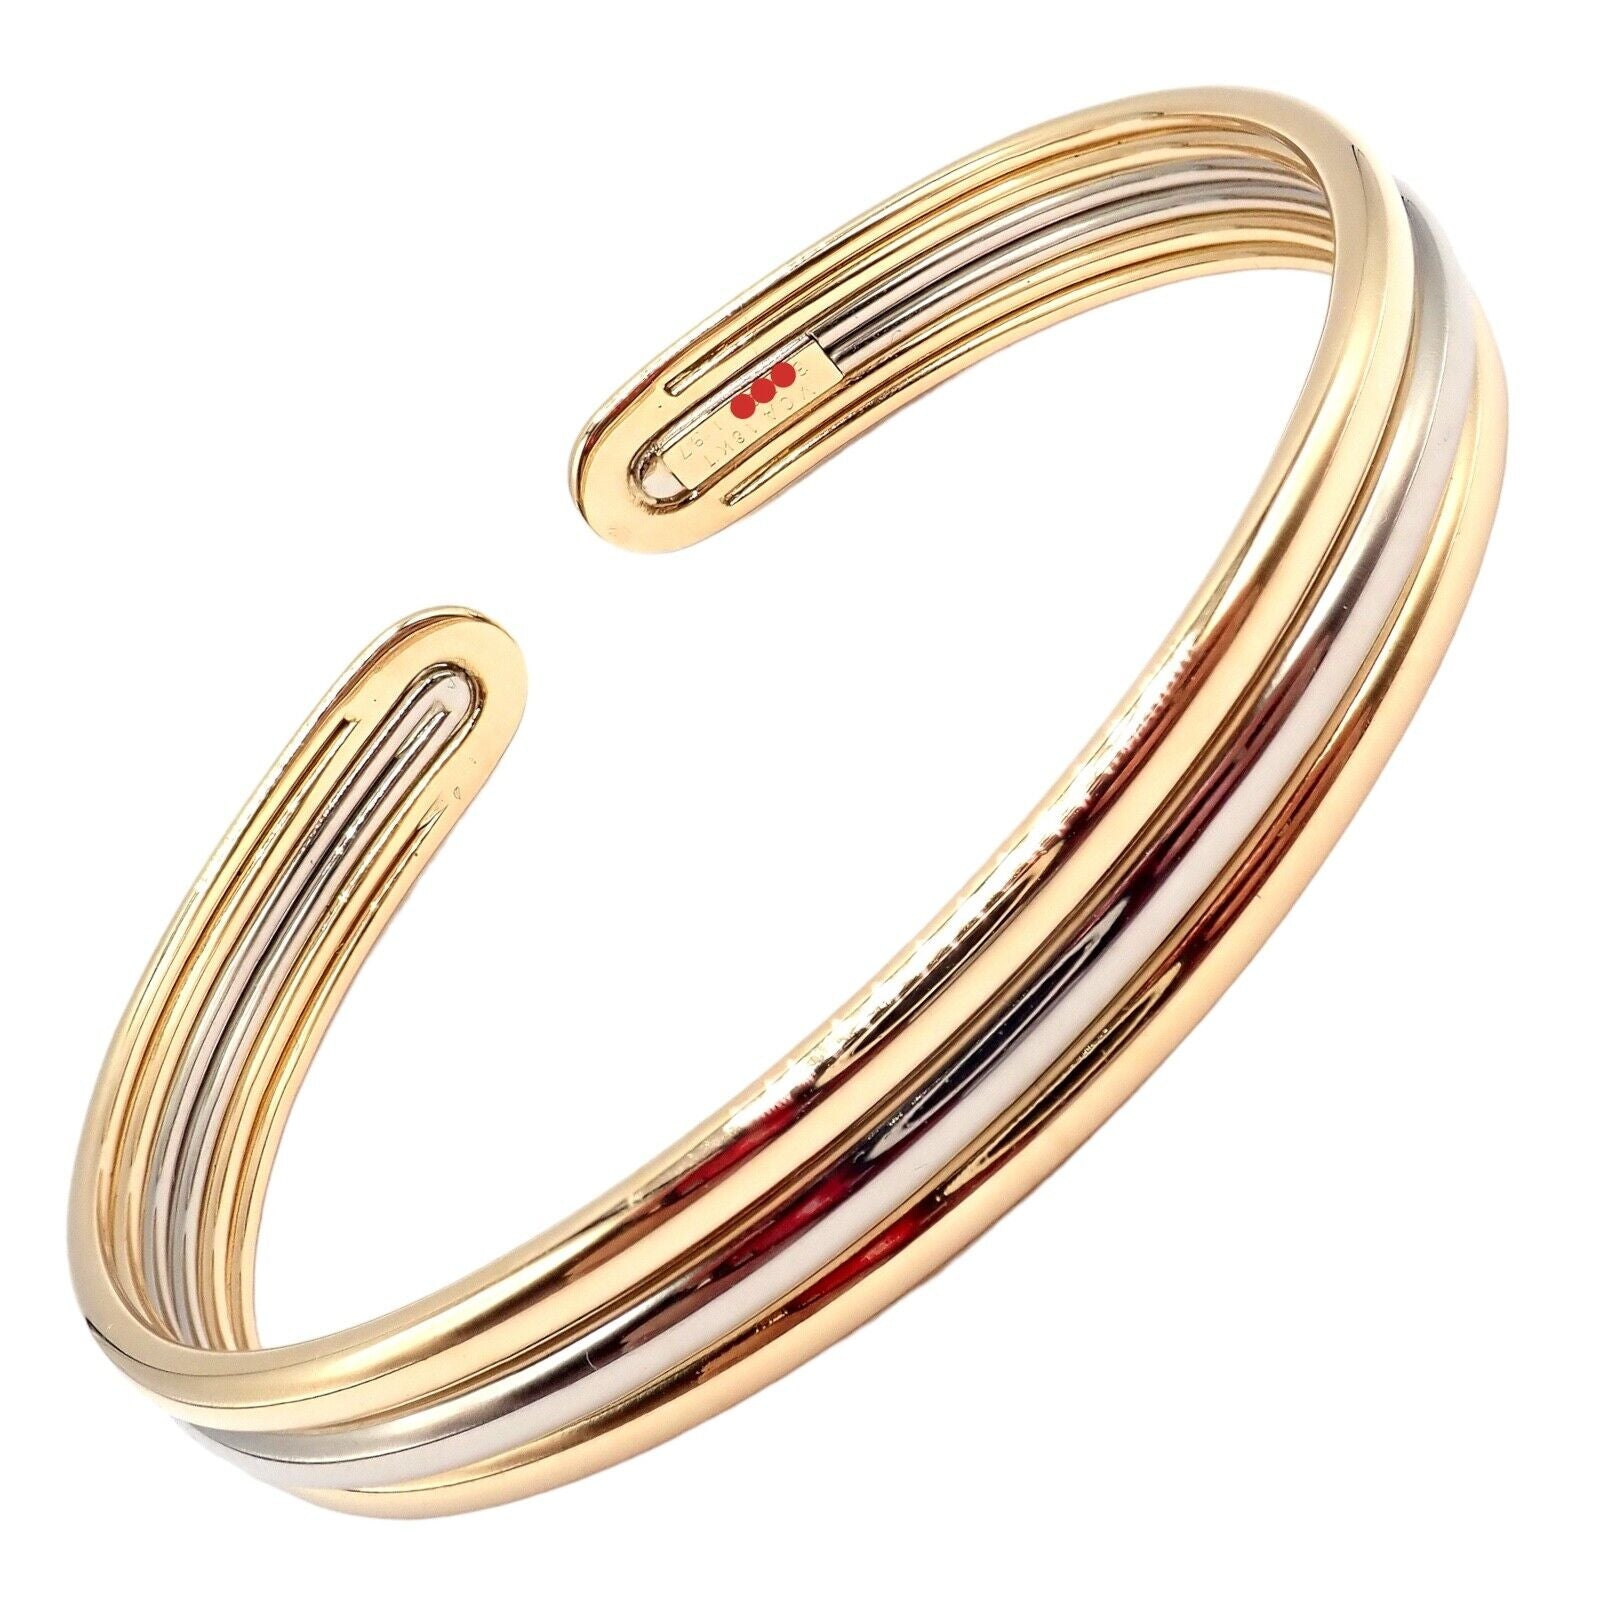 Van Cleef & Arpels Jewelry & Watches:Fine Jewelry:Bracelets & Charms Authentic! Van Cleef & Arpels 18k Yellow & White Gold Bangle Cuff Bracelet